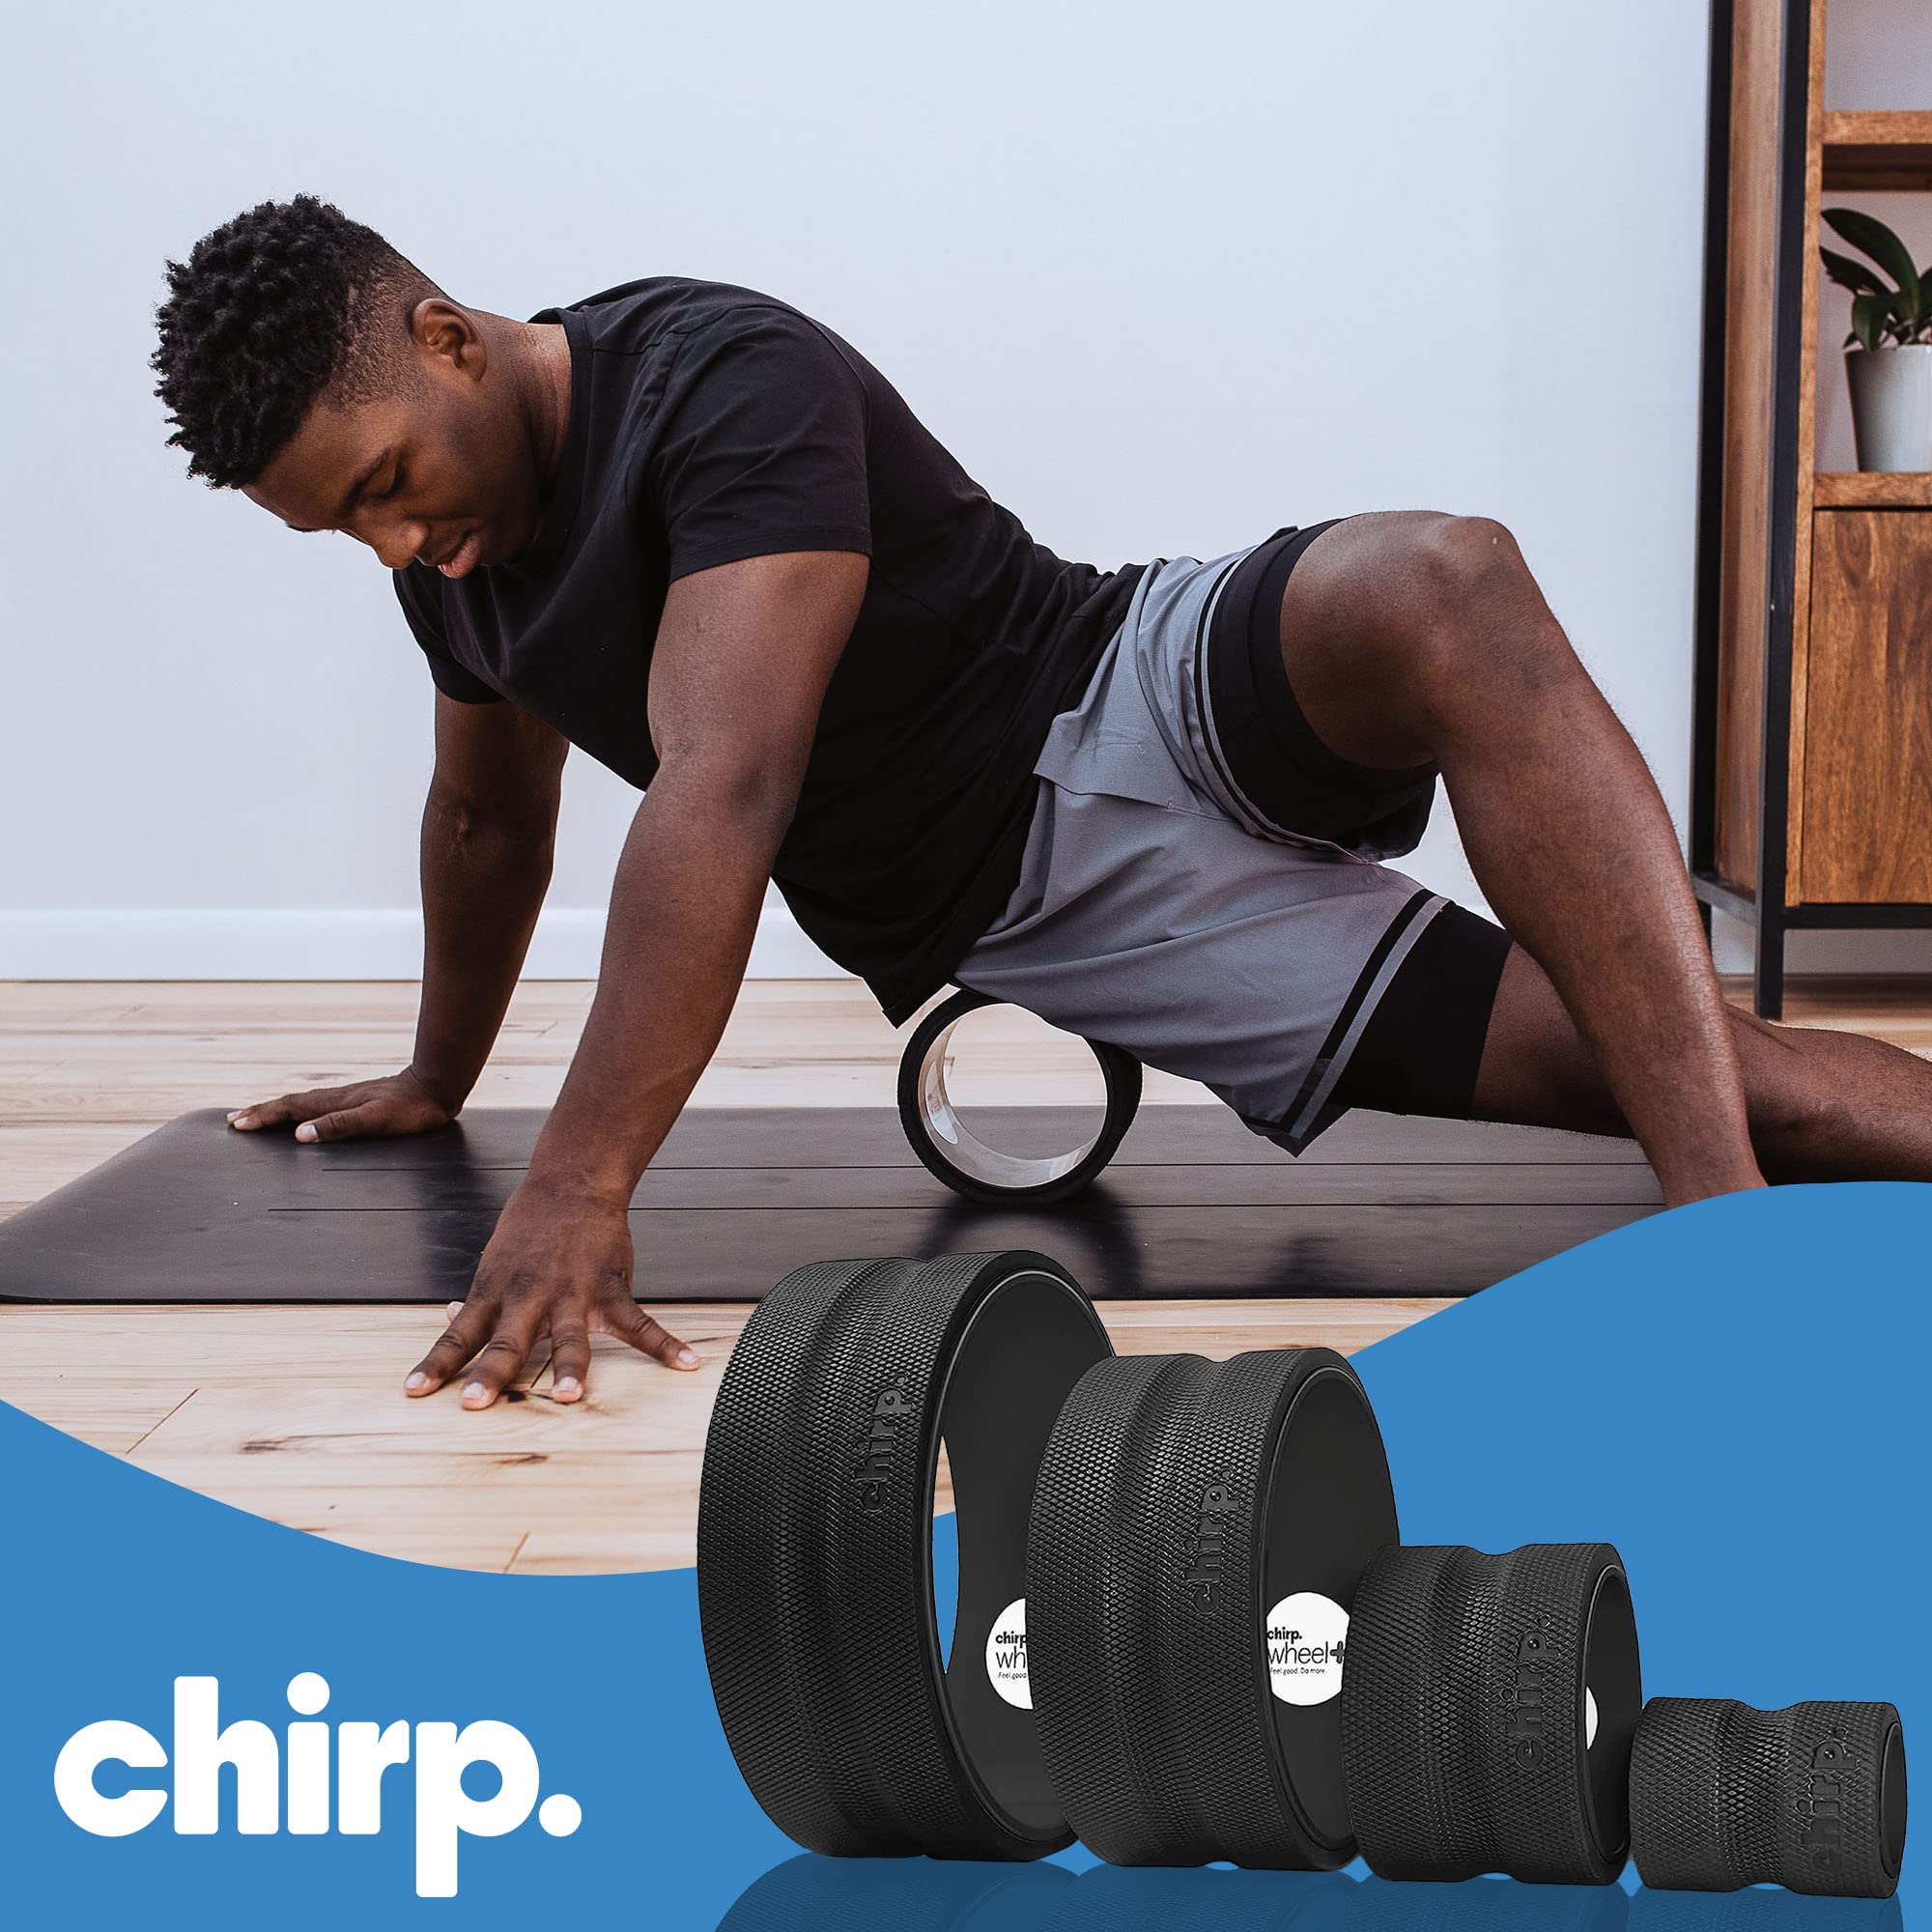 Chirp Wheel Foam Roller Set - Achieve Deep Muscle Relief with 4 Padded Foam Rollers: 12